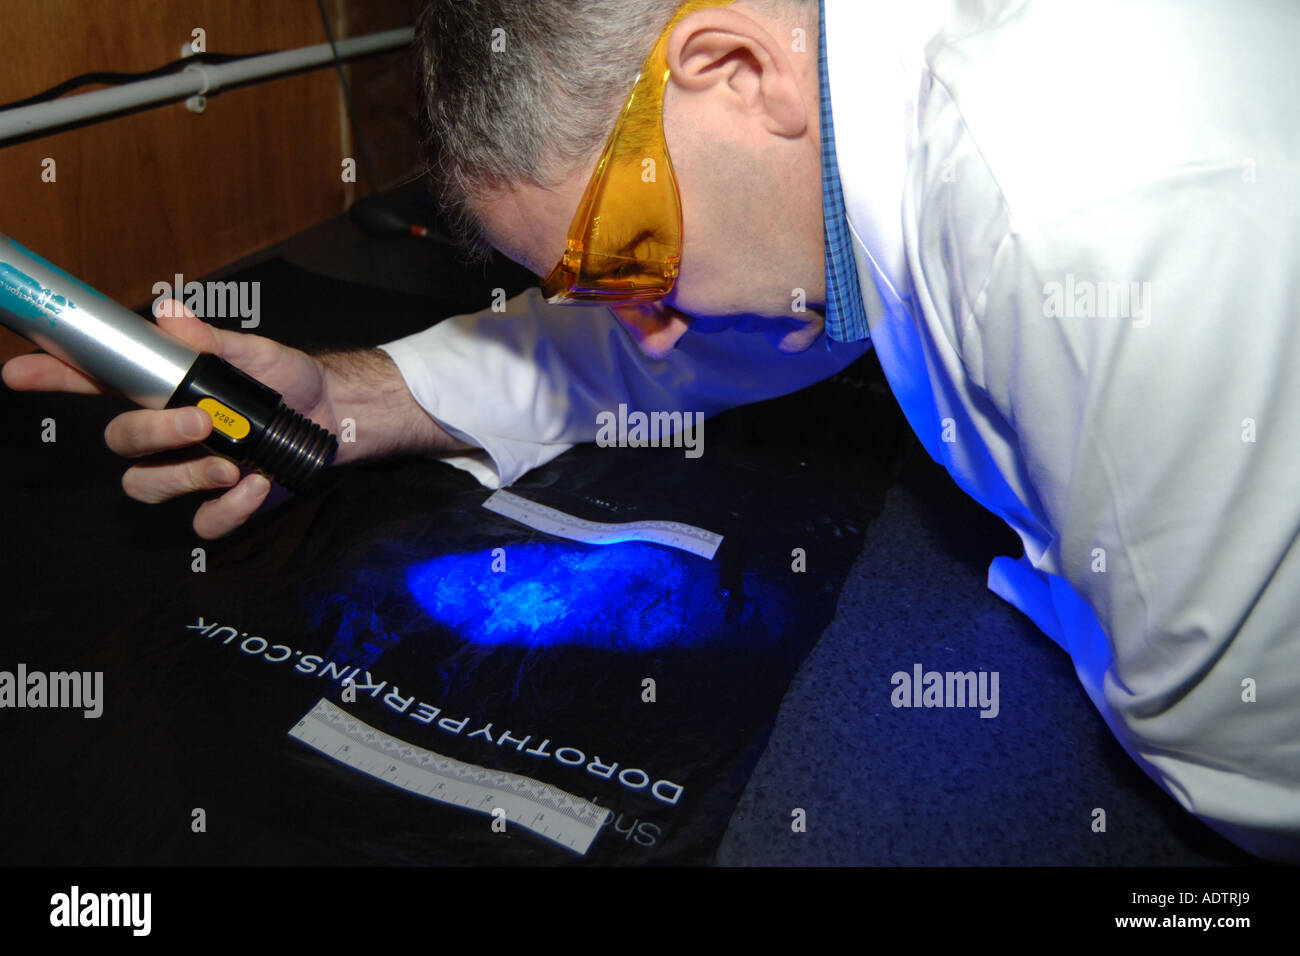 Forensic Police Officer searches for fingerprints on a plastic bag for evidence of crimes UK Stock Photo